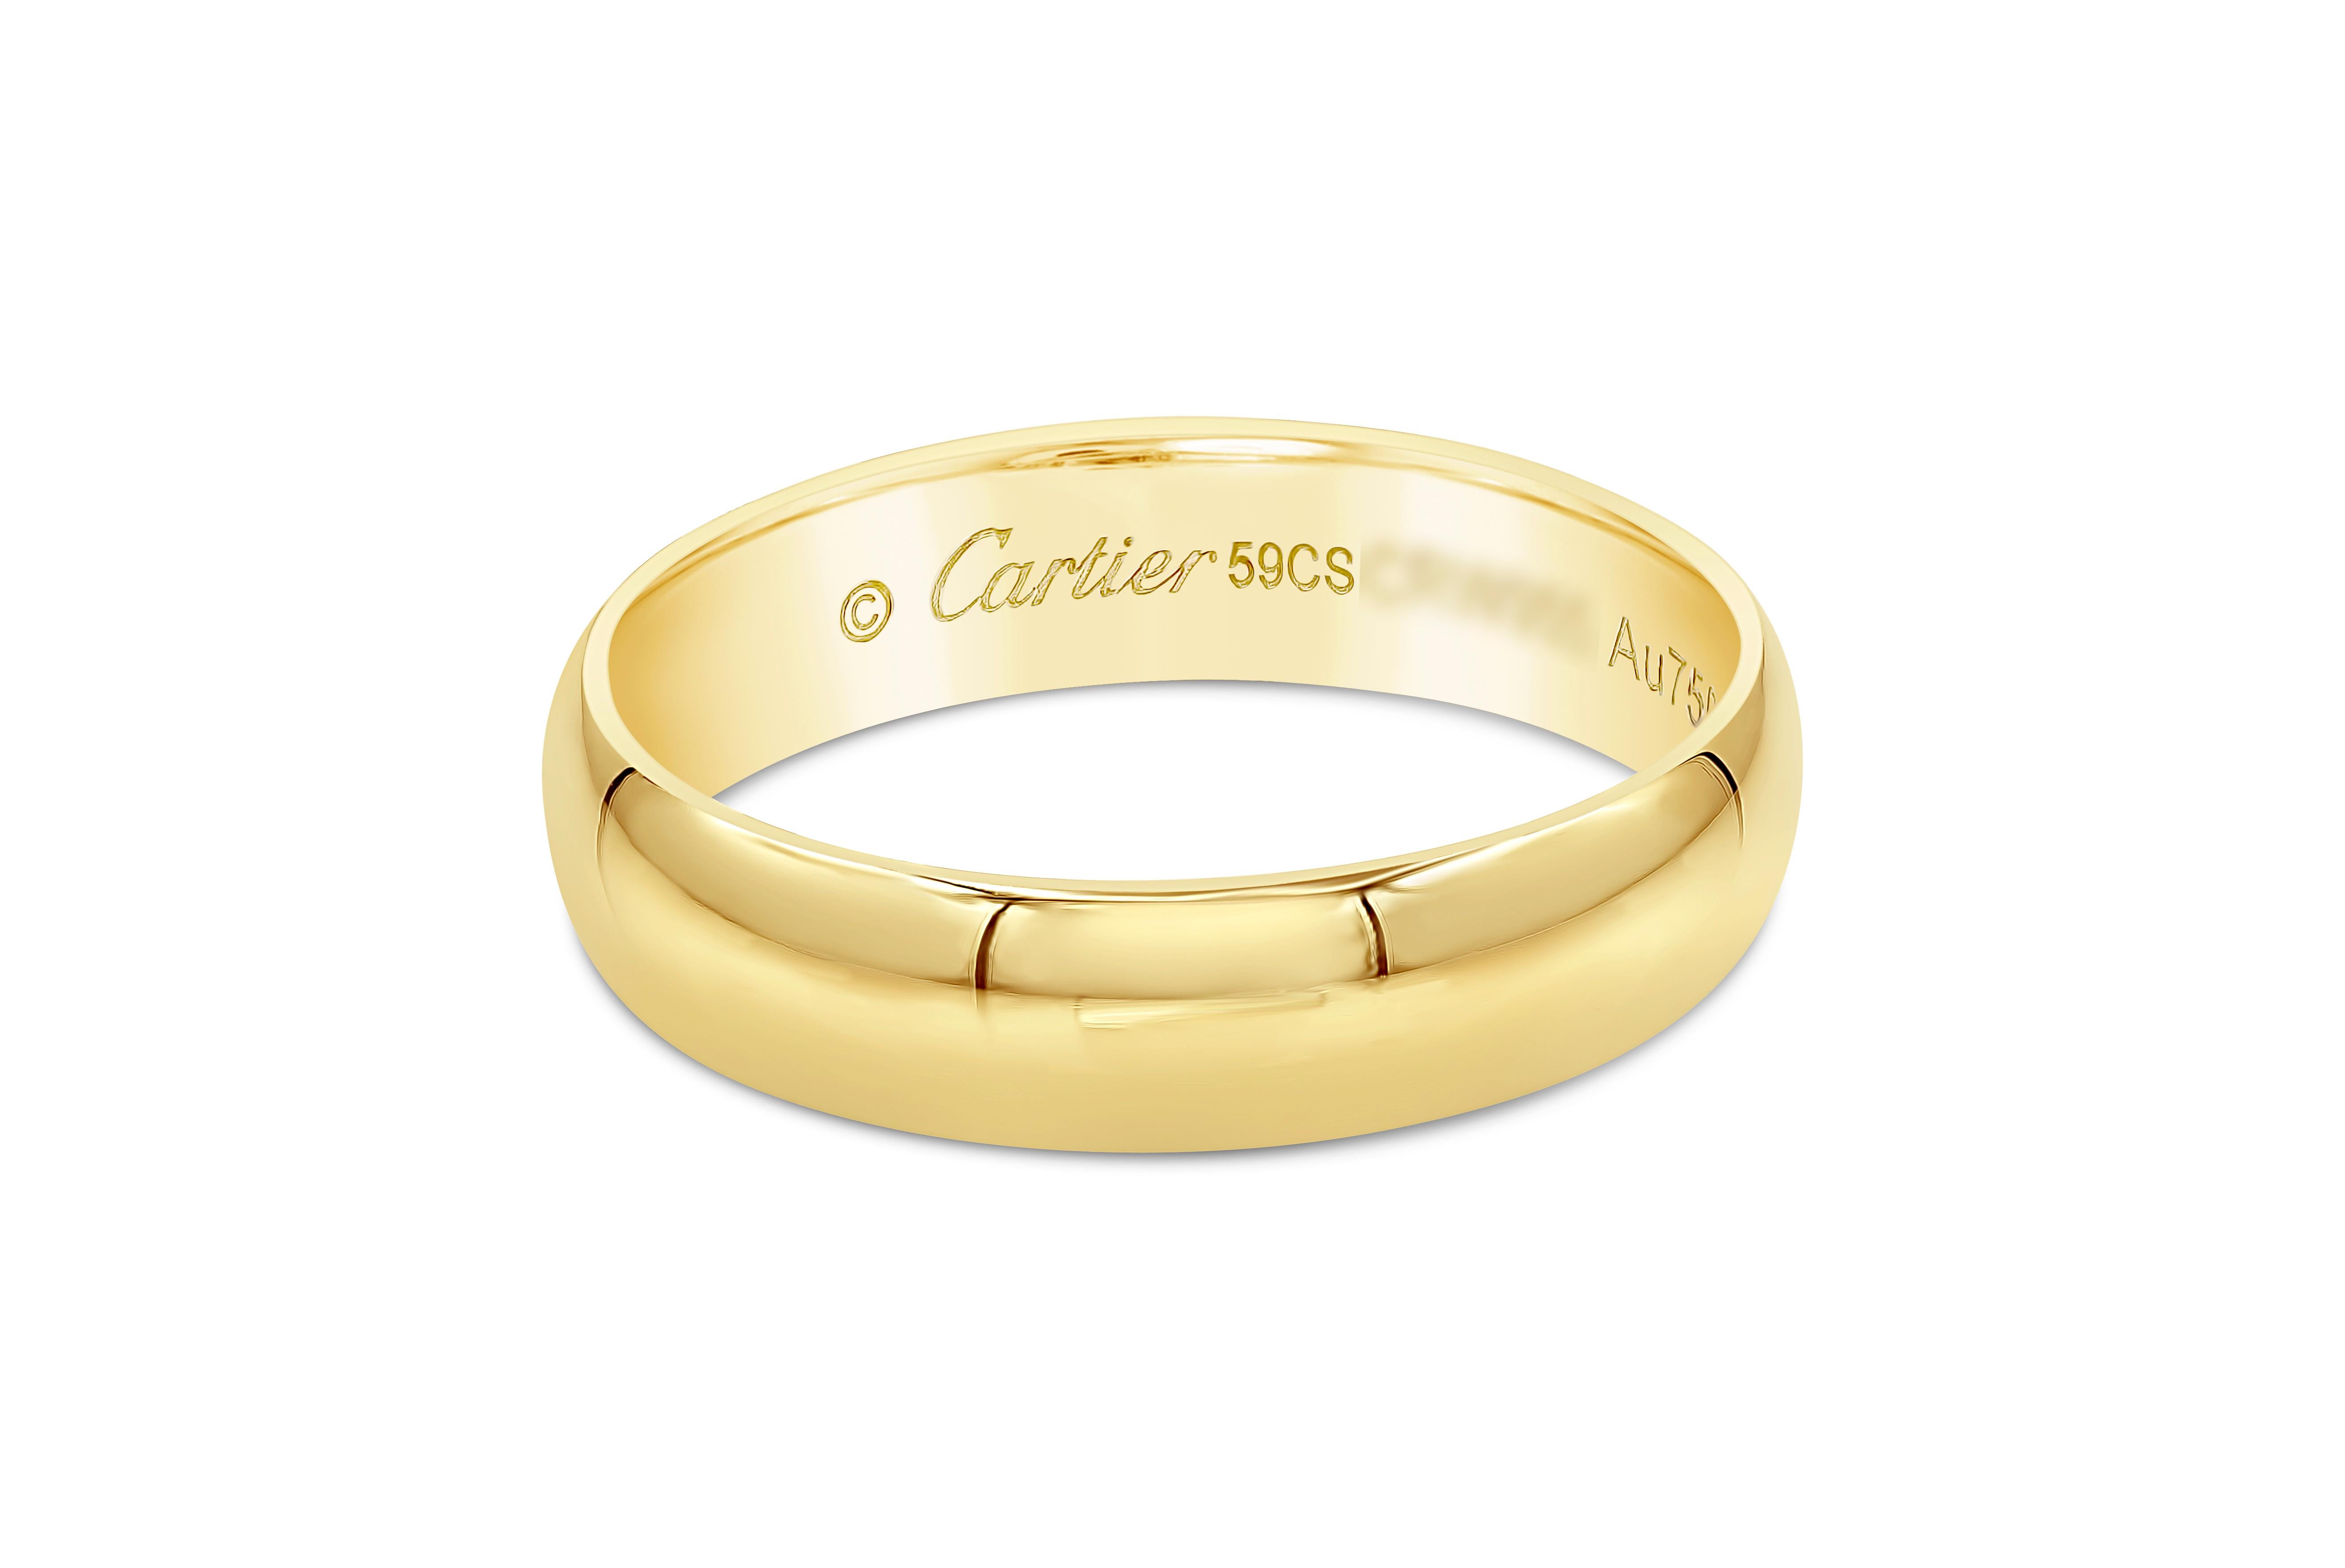 A classic and iconic wedding band style made and signed by Cartier. From the 1895 collection, it features a rounded shape made in 18k yellow gold. 5 millimeters wide.

Comes as a matching set; size 53 (6.25 US) and size 59 (8.75 US). Can be bought